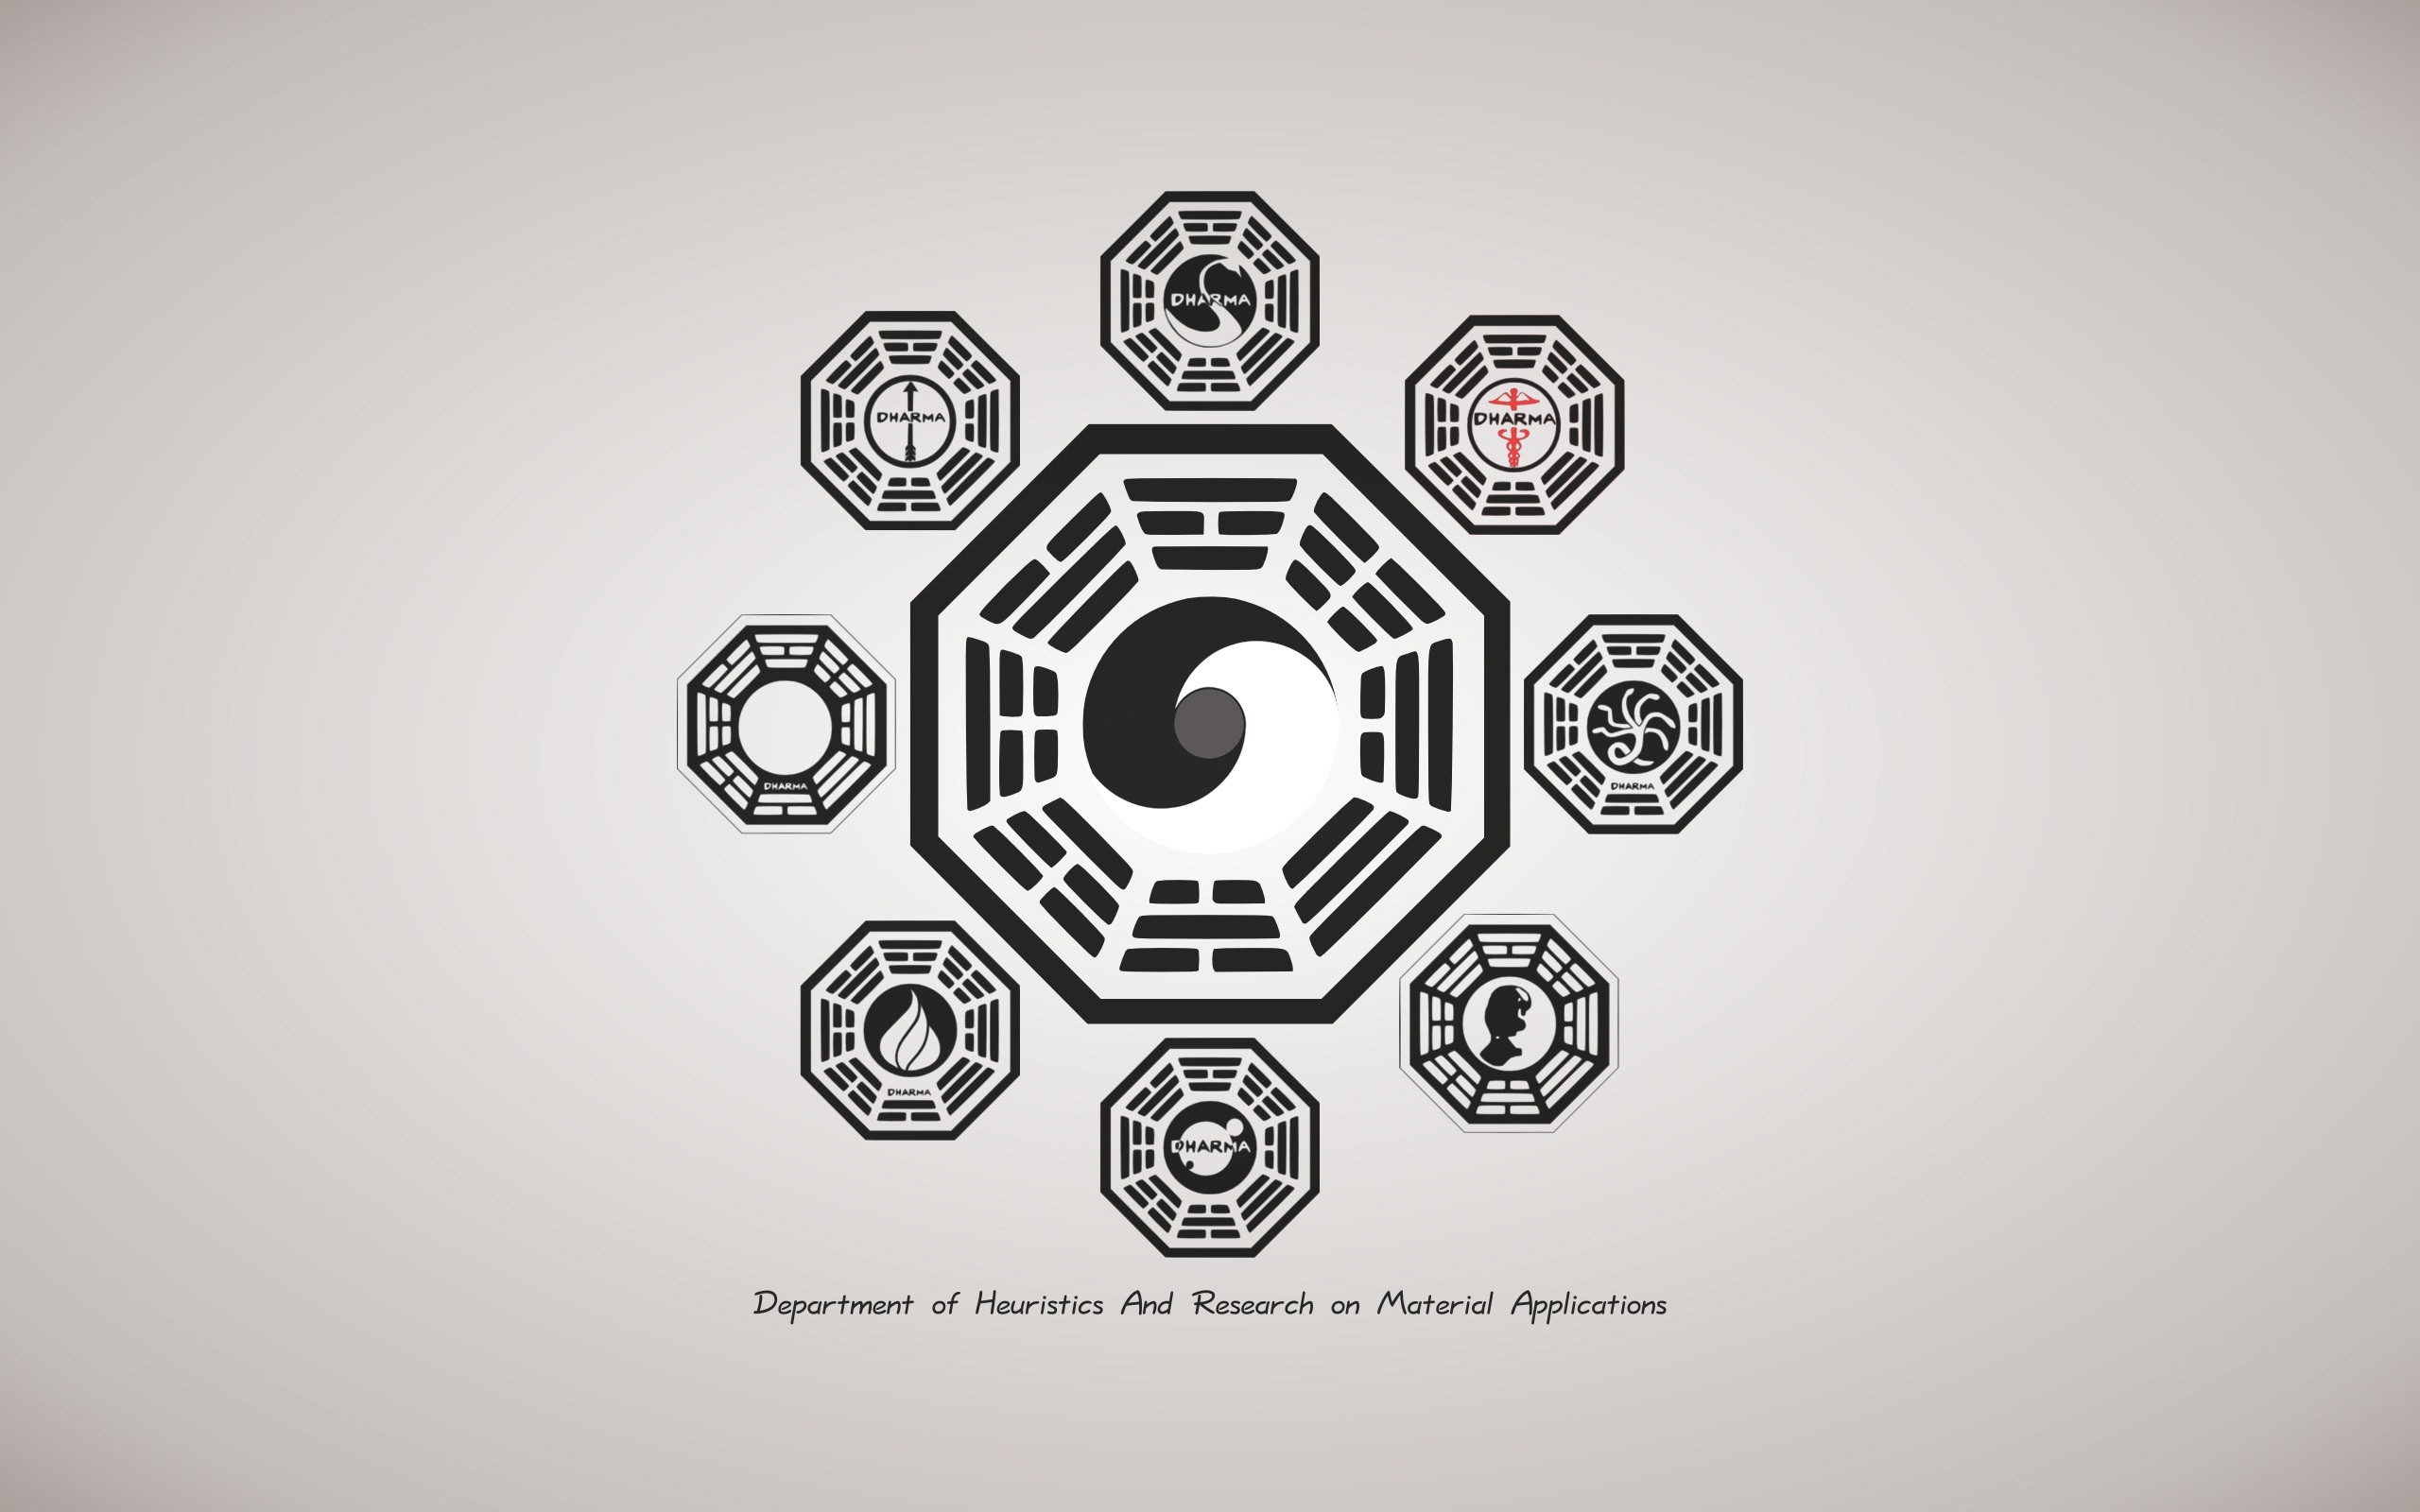 Dharma Initiative Lost Simple Background 2560x1600